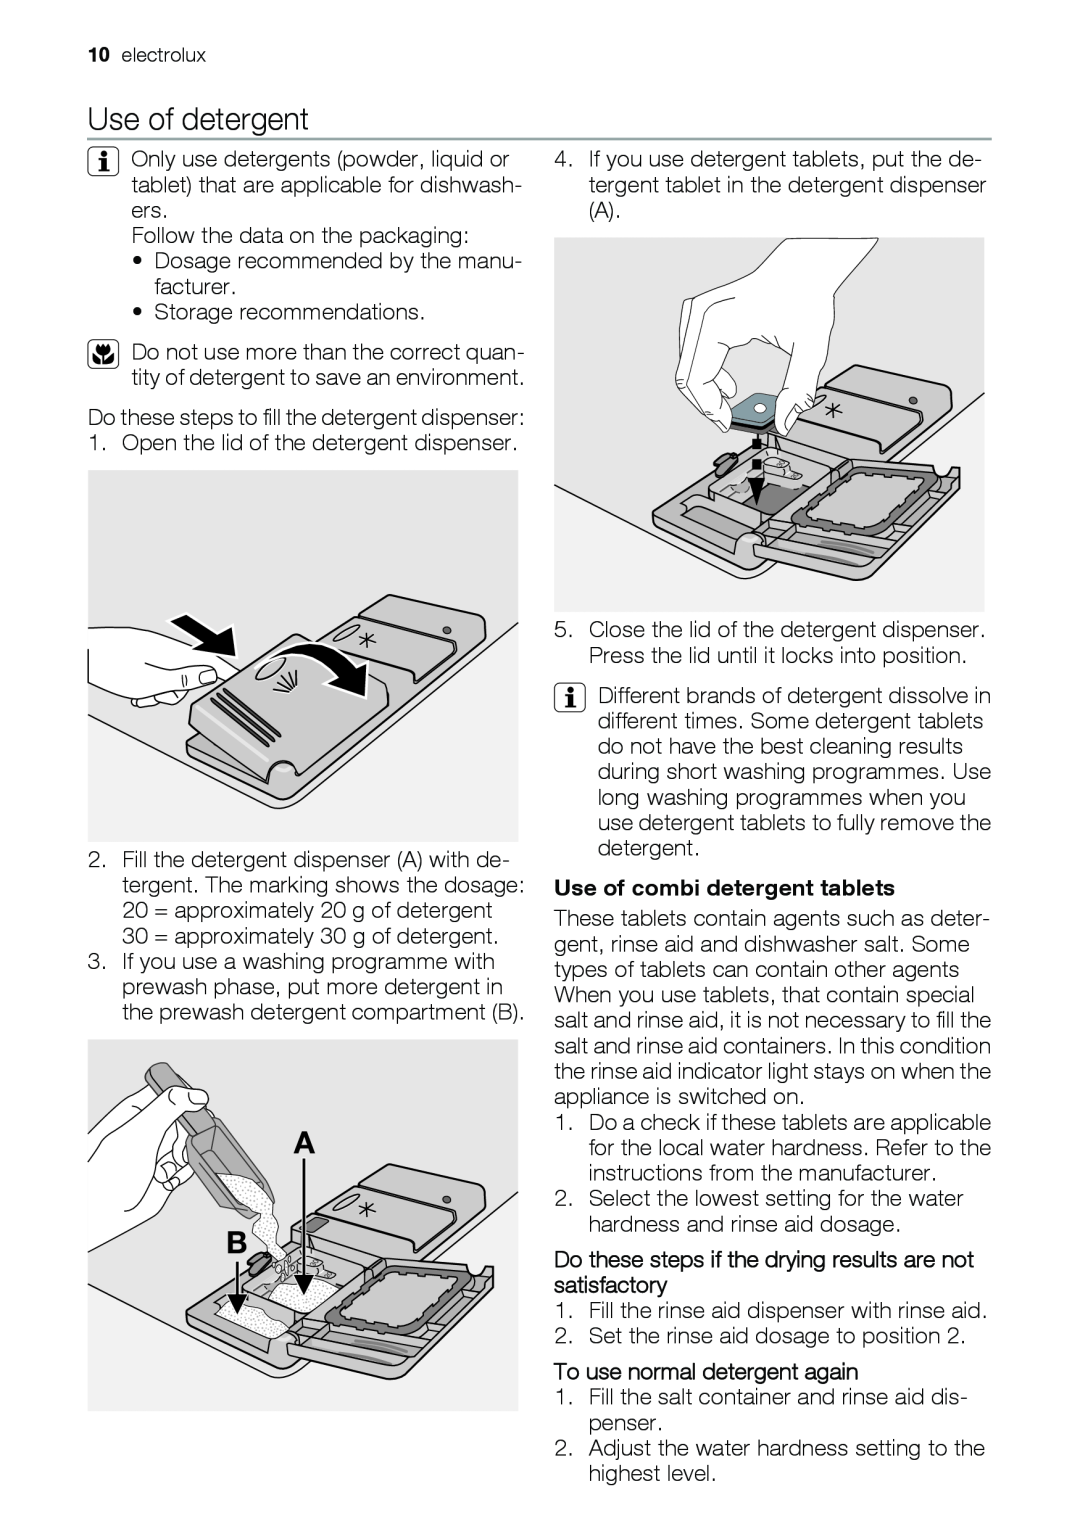 Epson ESL63010 Use of detergent, Use of combi detergent tablets, Do these steps if the drying results are not satisfactory 